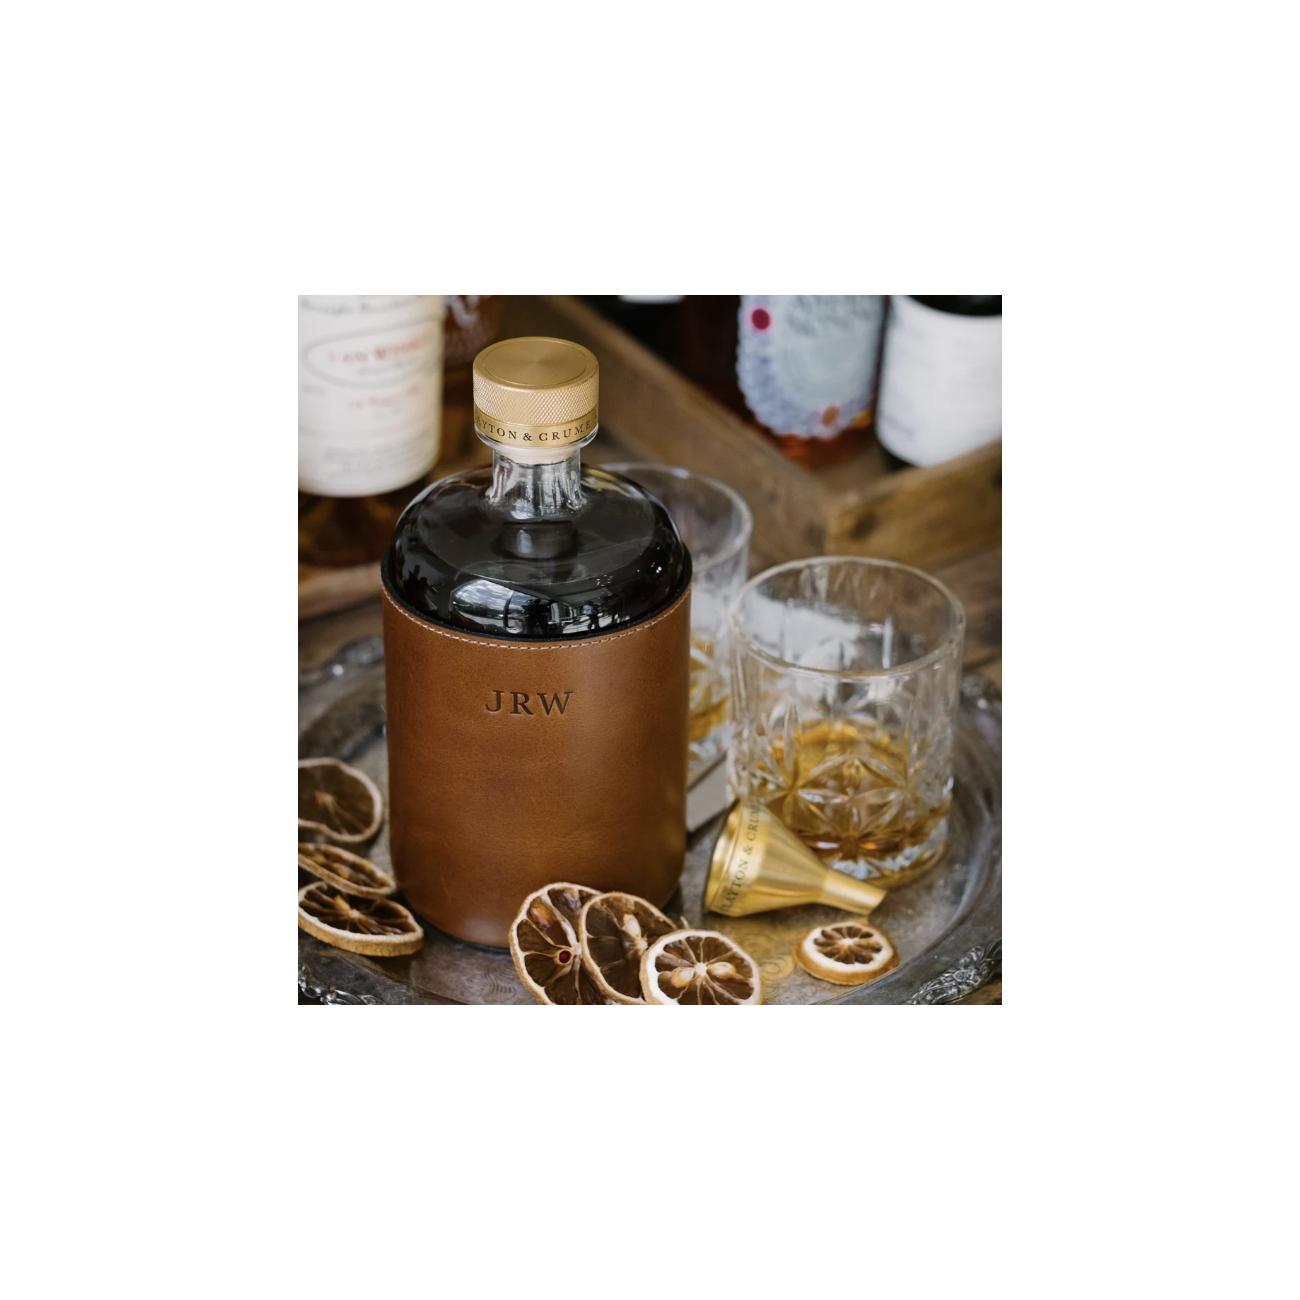 The Original Leather Decanter - Includes Initials Laser Engraving Only